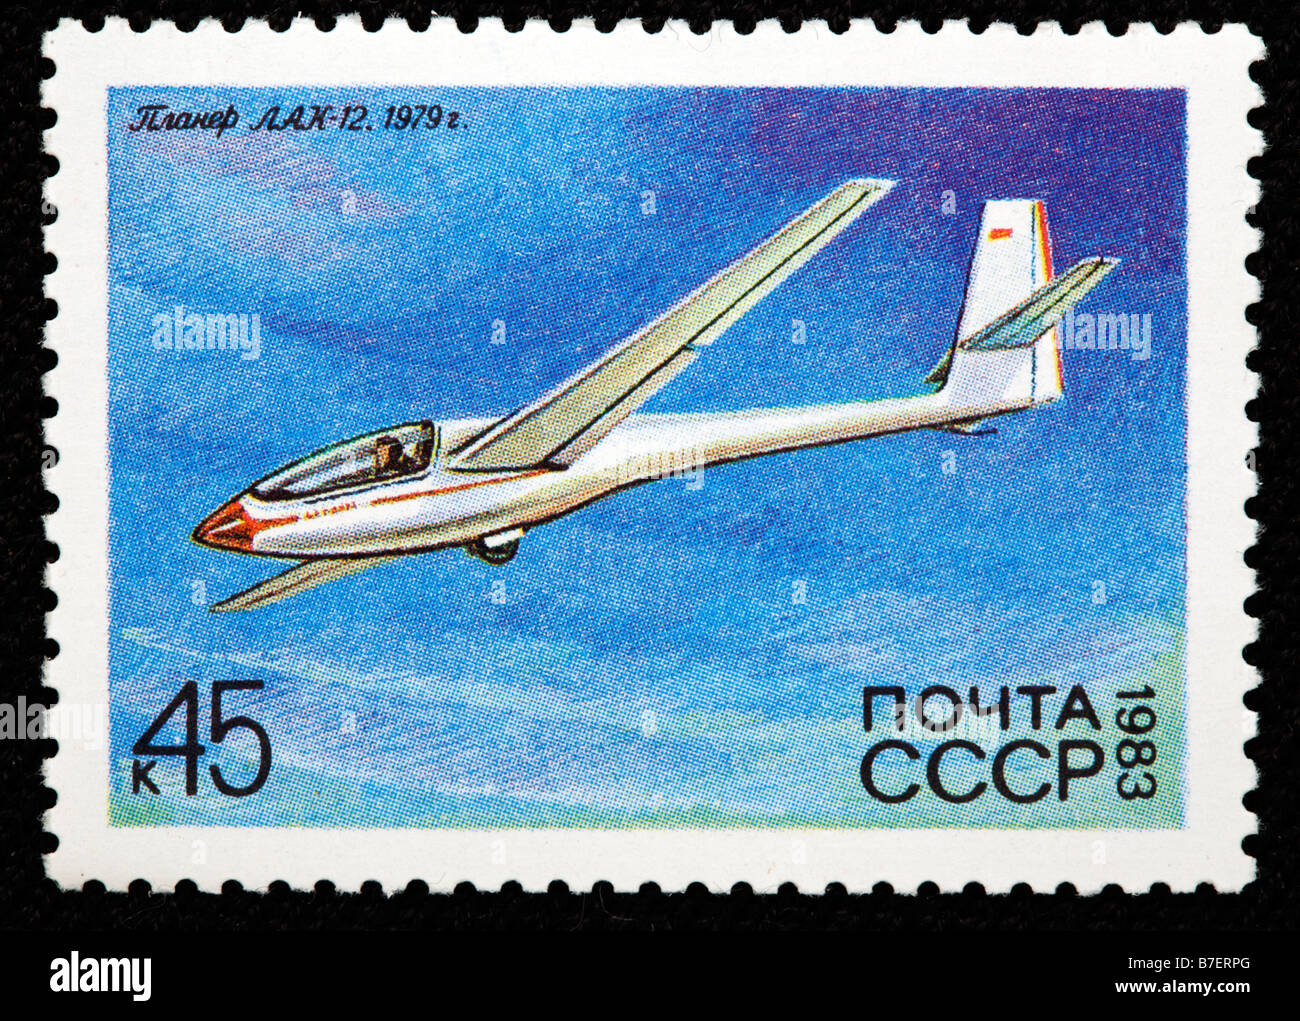 History of aviation, Russian glider 'LAK 12' (1979), postage stamp, USSR, Russia, 1983 Stock Photo